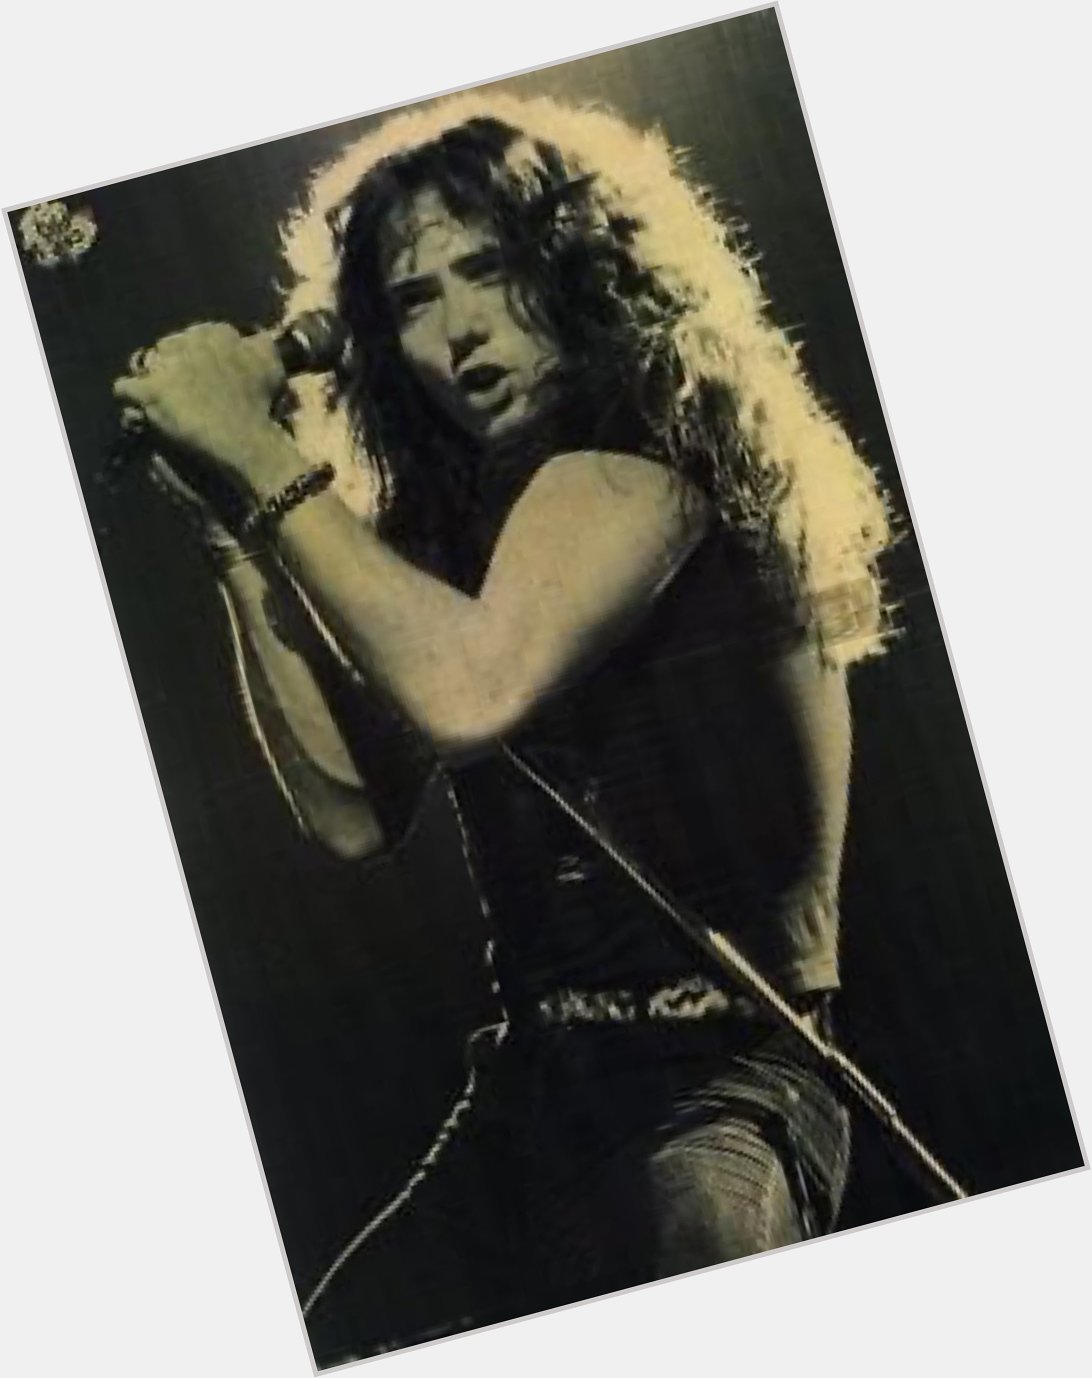 Happy 71st birthday to David Coverdale, one of the greatest vocalists and frontmen of all time! 